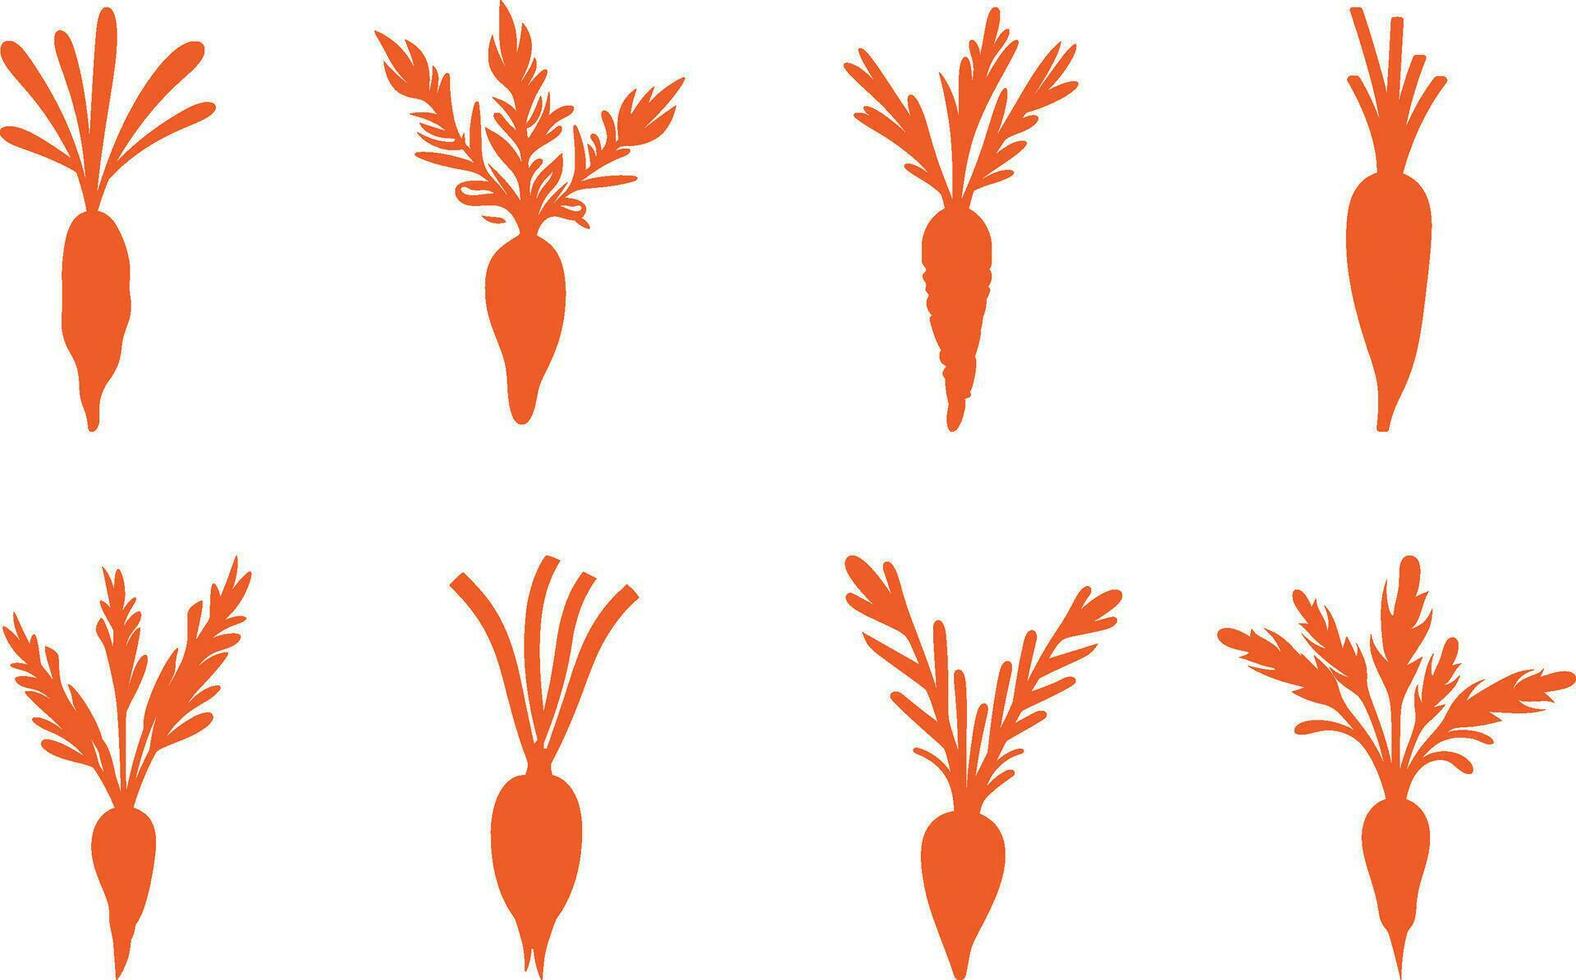 Carrot Vector Icons   Set of Healthy Food Symbols for Graphic Design